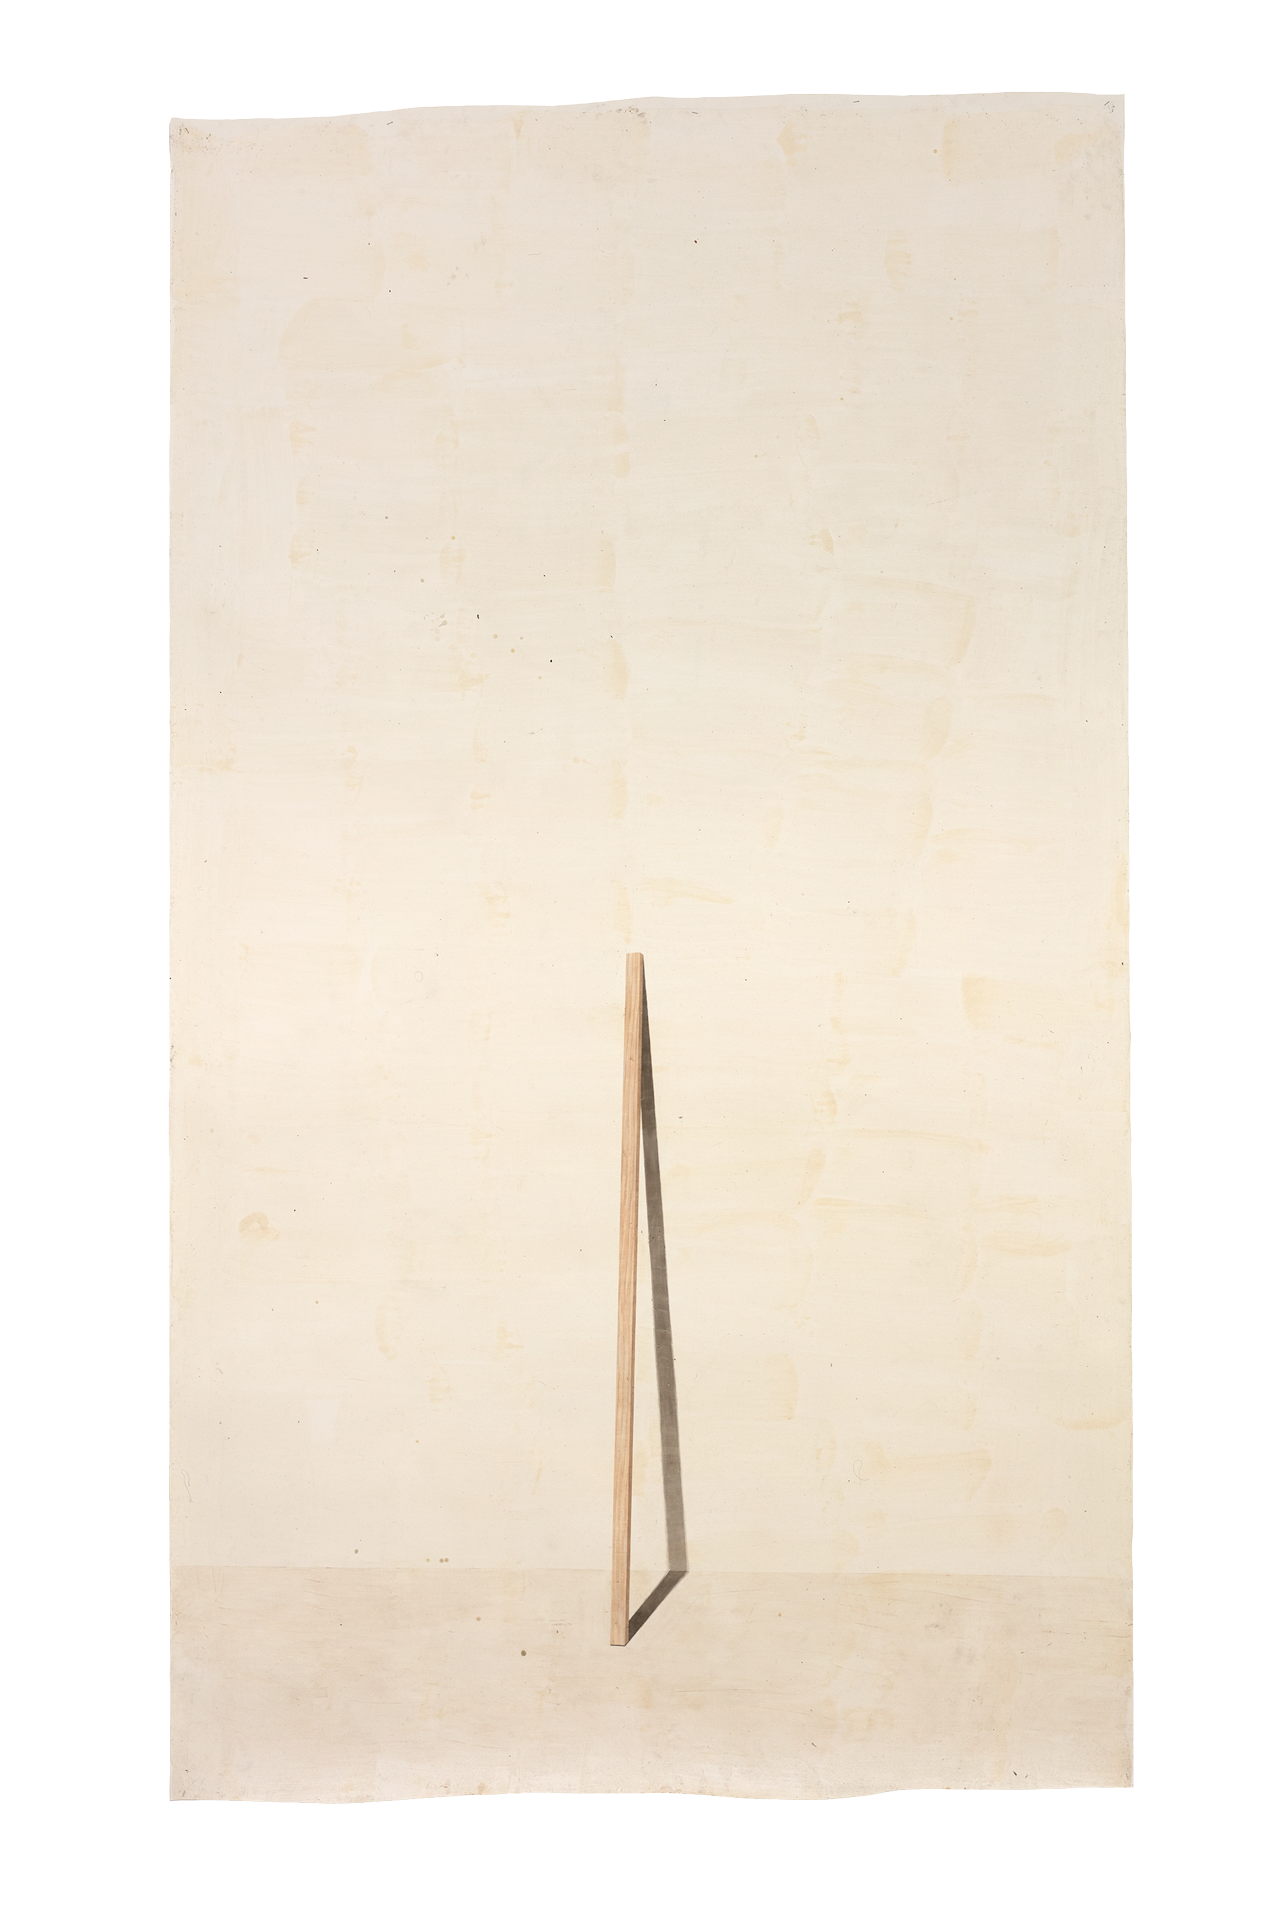 An oil and wax work on paper by Toba Khedoori, titled Untitled (stick), dated 2005.